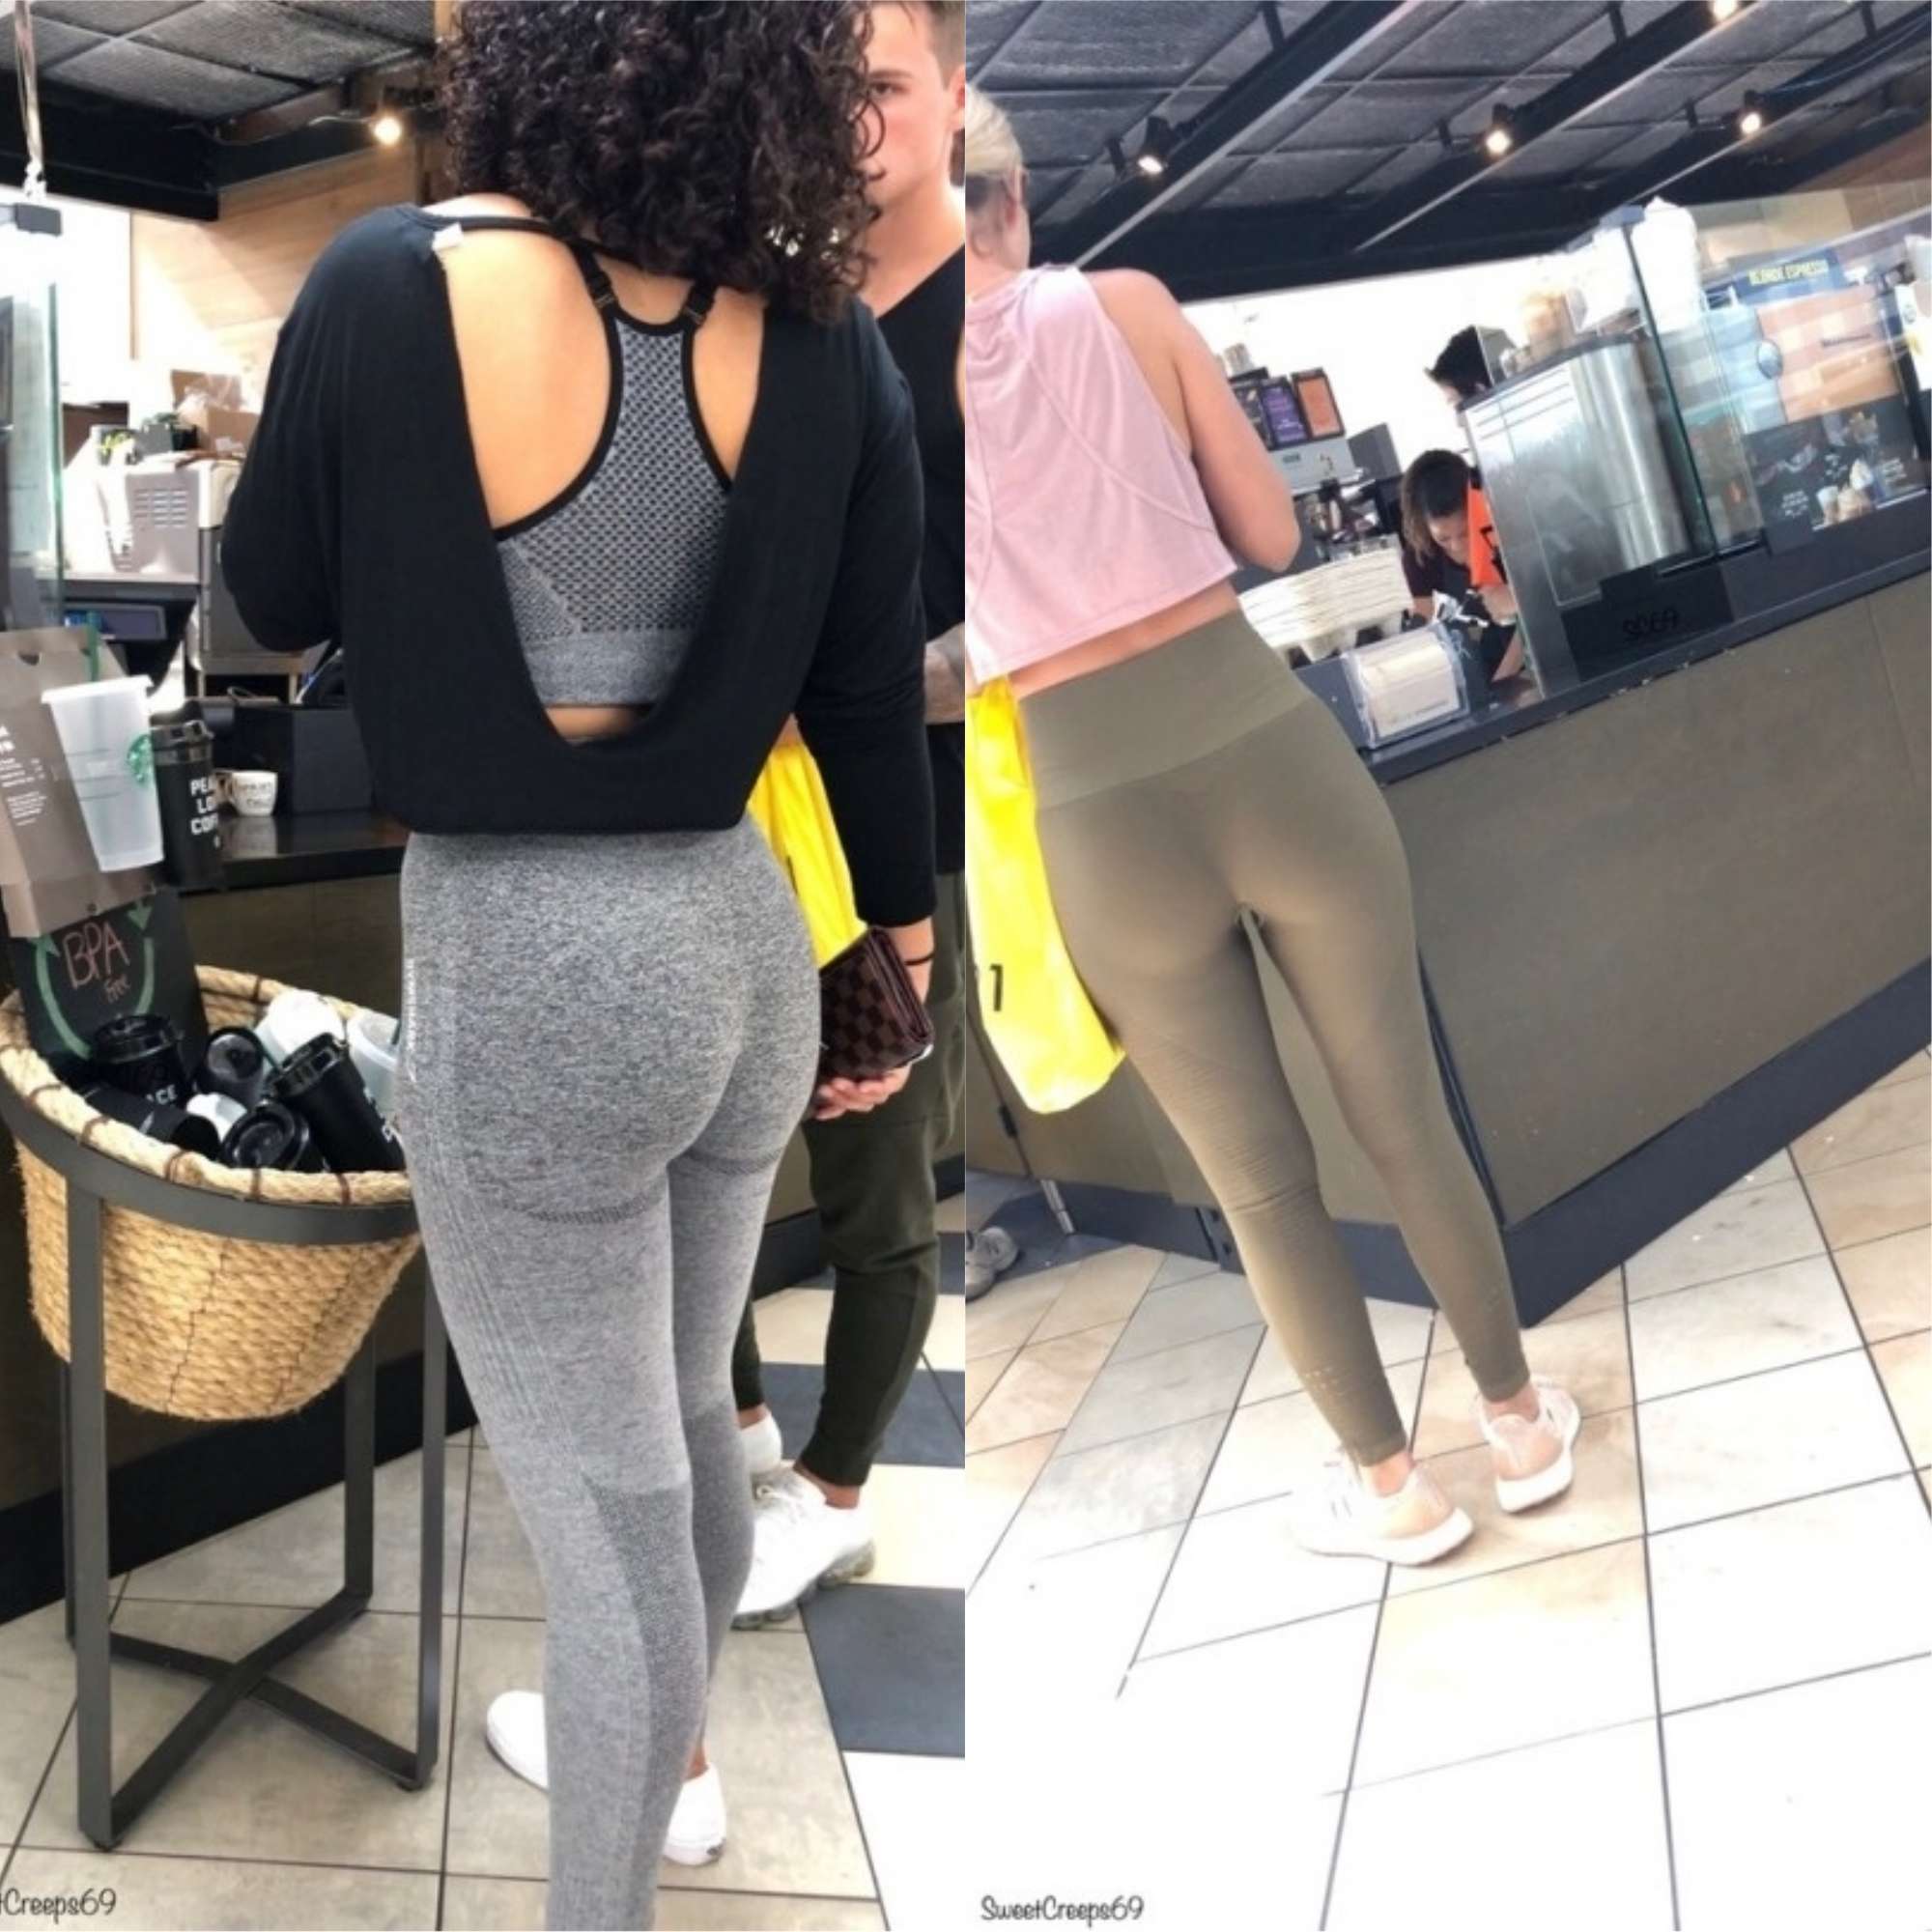 https://sexycandidgirls.com/wp-content/uploads/2018/10/Two-Hot-Girls-Shopping-In-Tight-Yoga-Pants.jpg